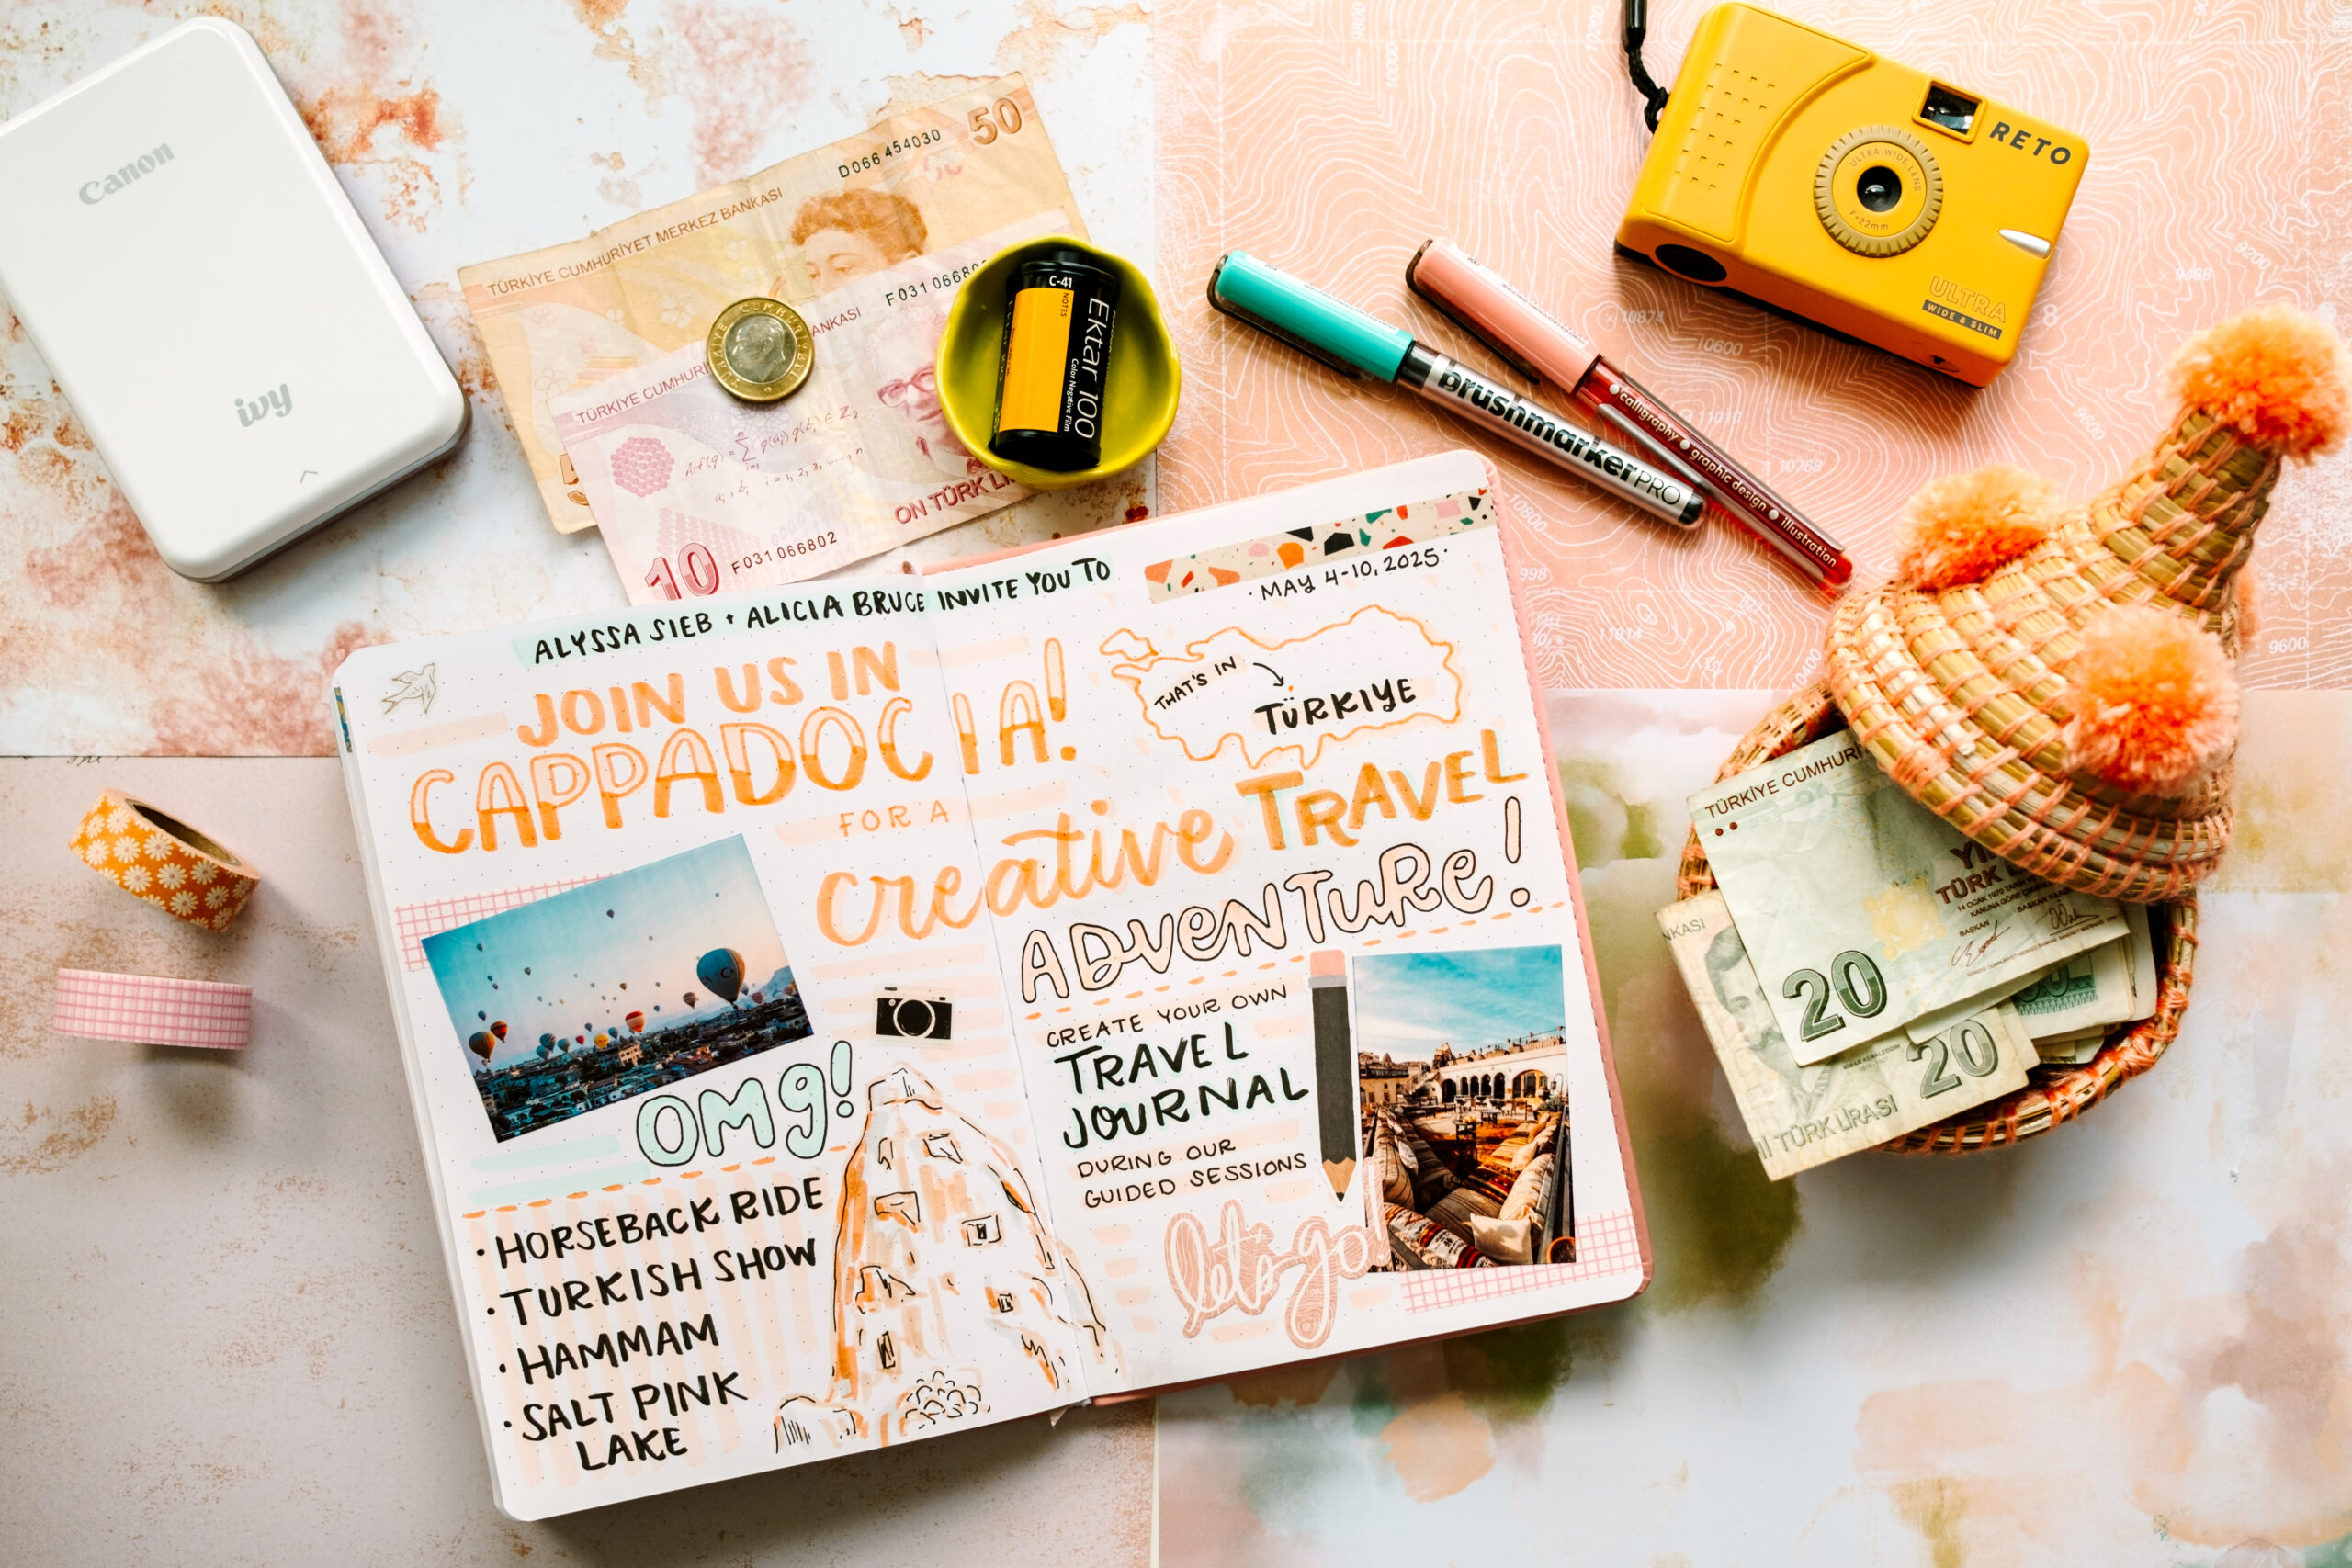 artistic travel journal advertising for a travel journaling creative retreat to cappadocia, turkey